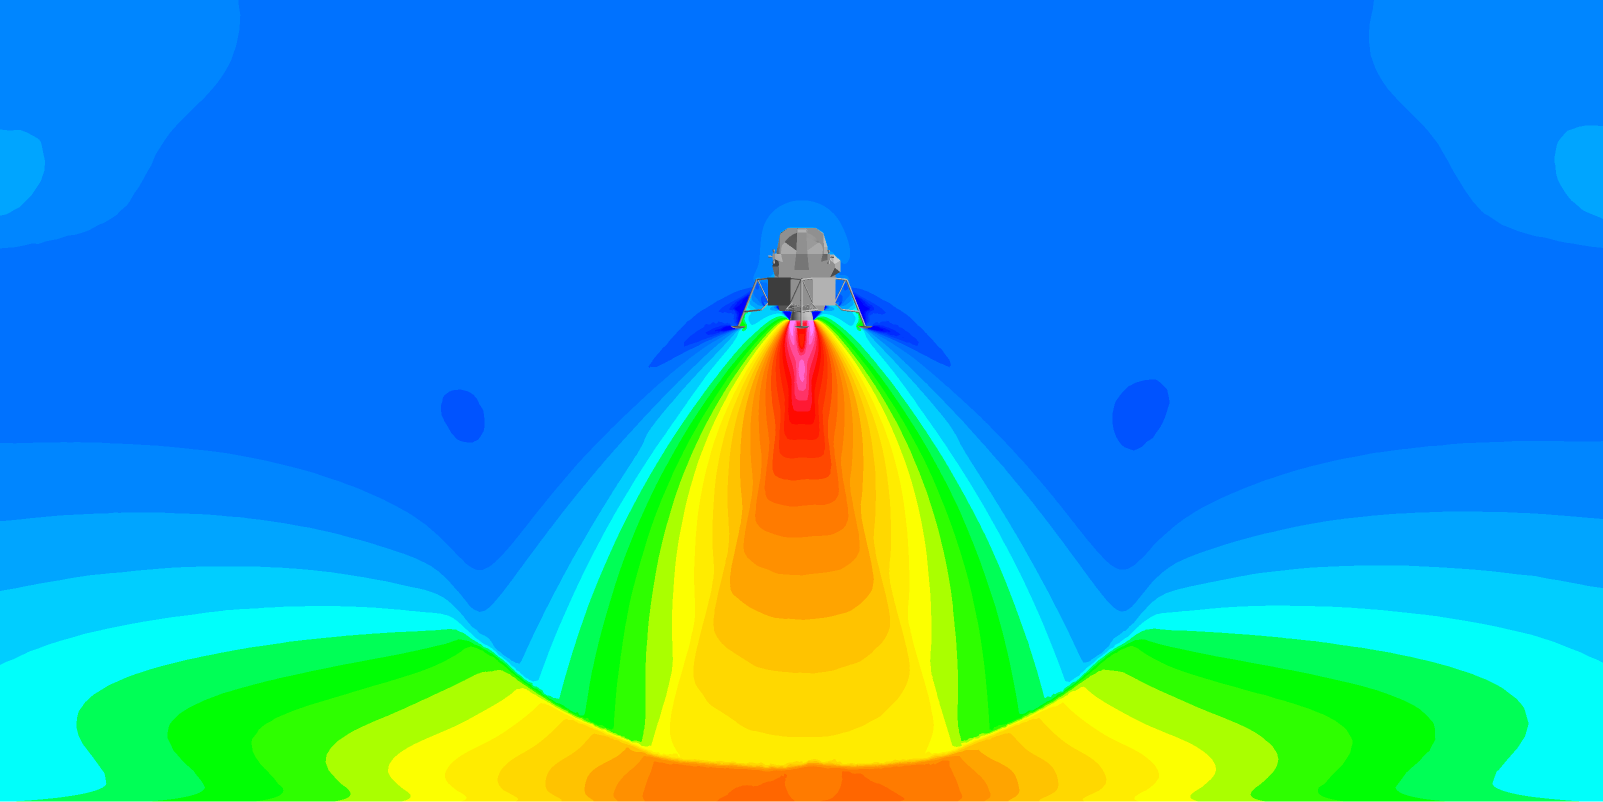 Apollo Lunar Module plume impingement at a distance of 30 m above the landing surface. Image shows plume gas density on a logarithmic scale (blue = low, magenta = high) indicating the large plume expansion envelope in a vacuum background.